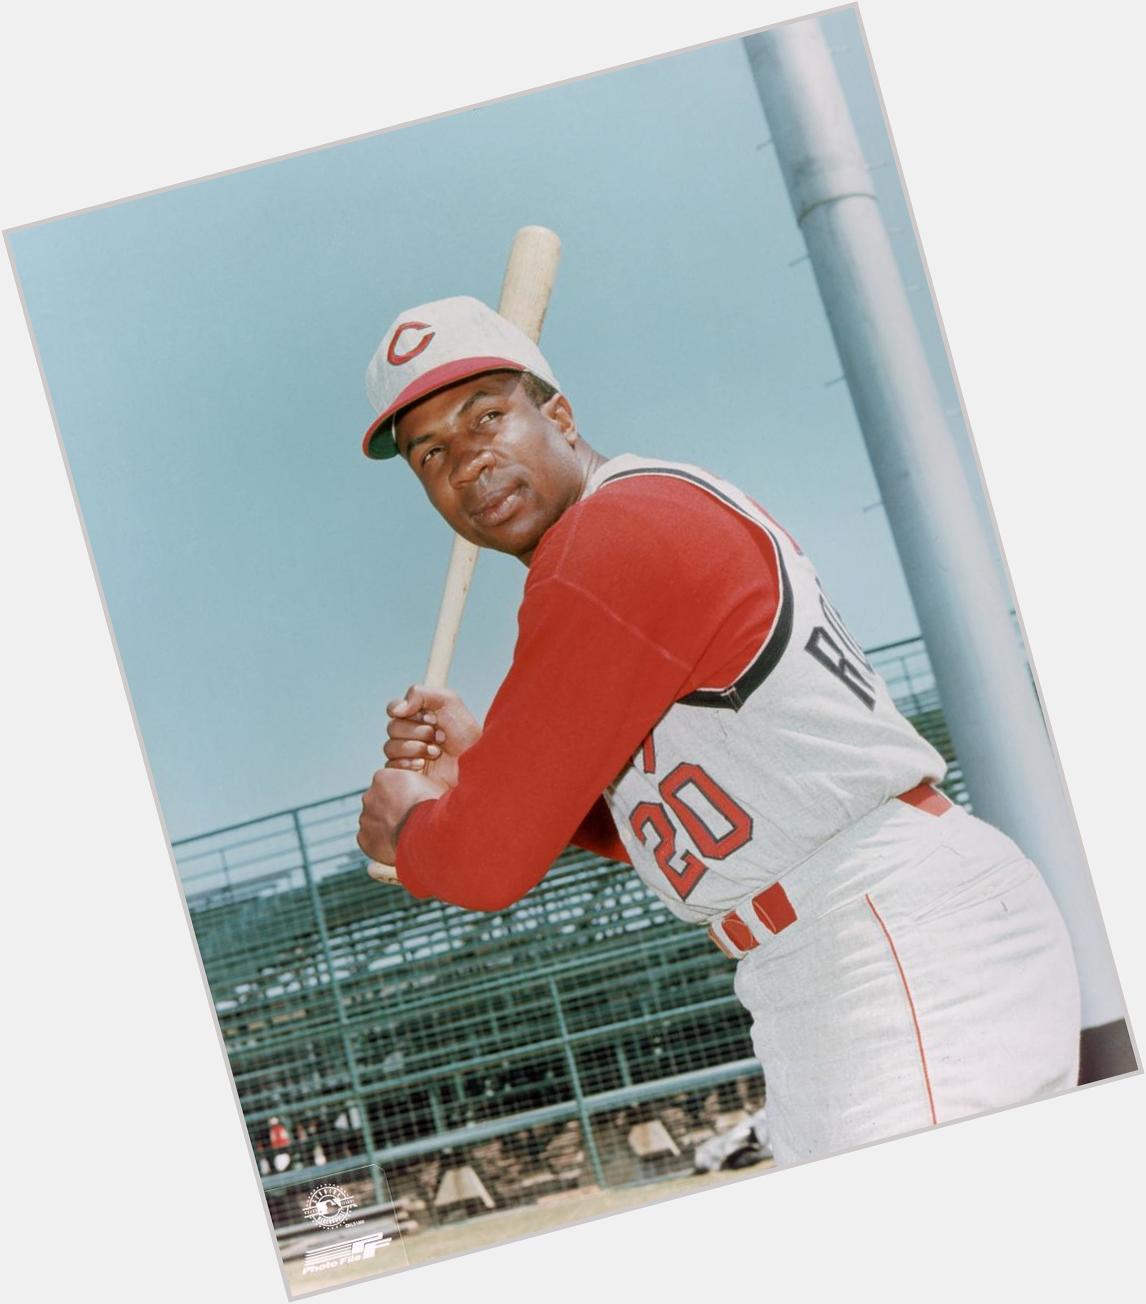 Happy Birthday to the one and only legend Frank Robinson 